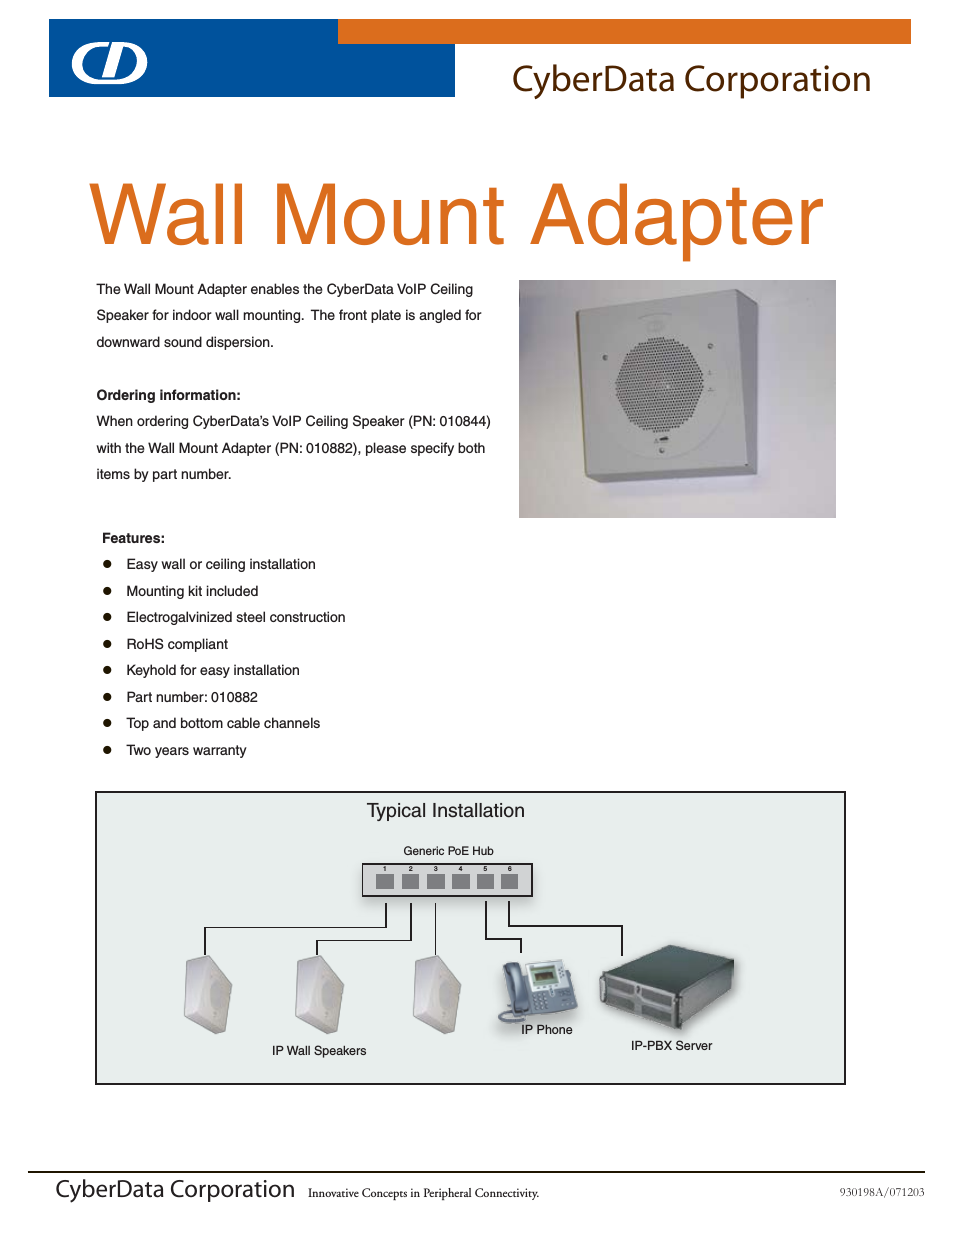 Wall Mount Adapter